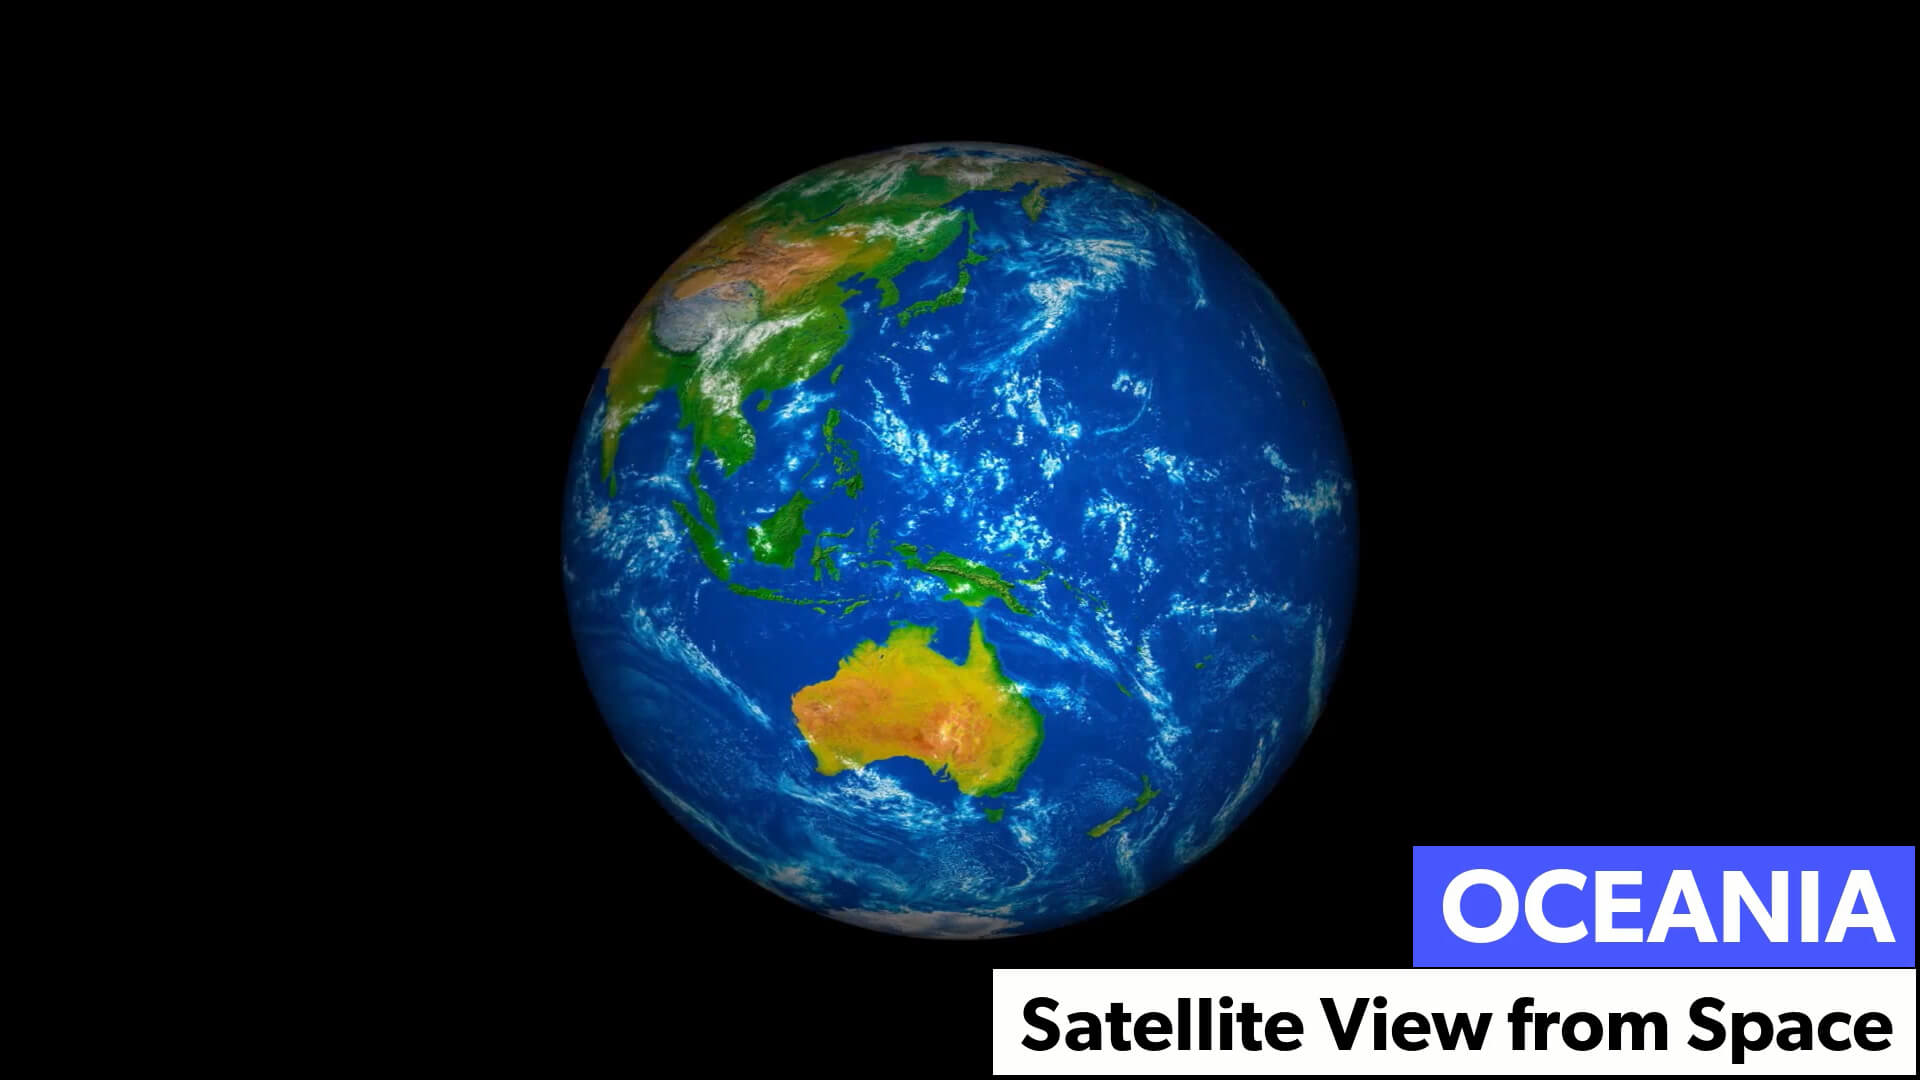 Oceania Satellite View from Space